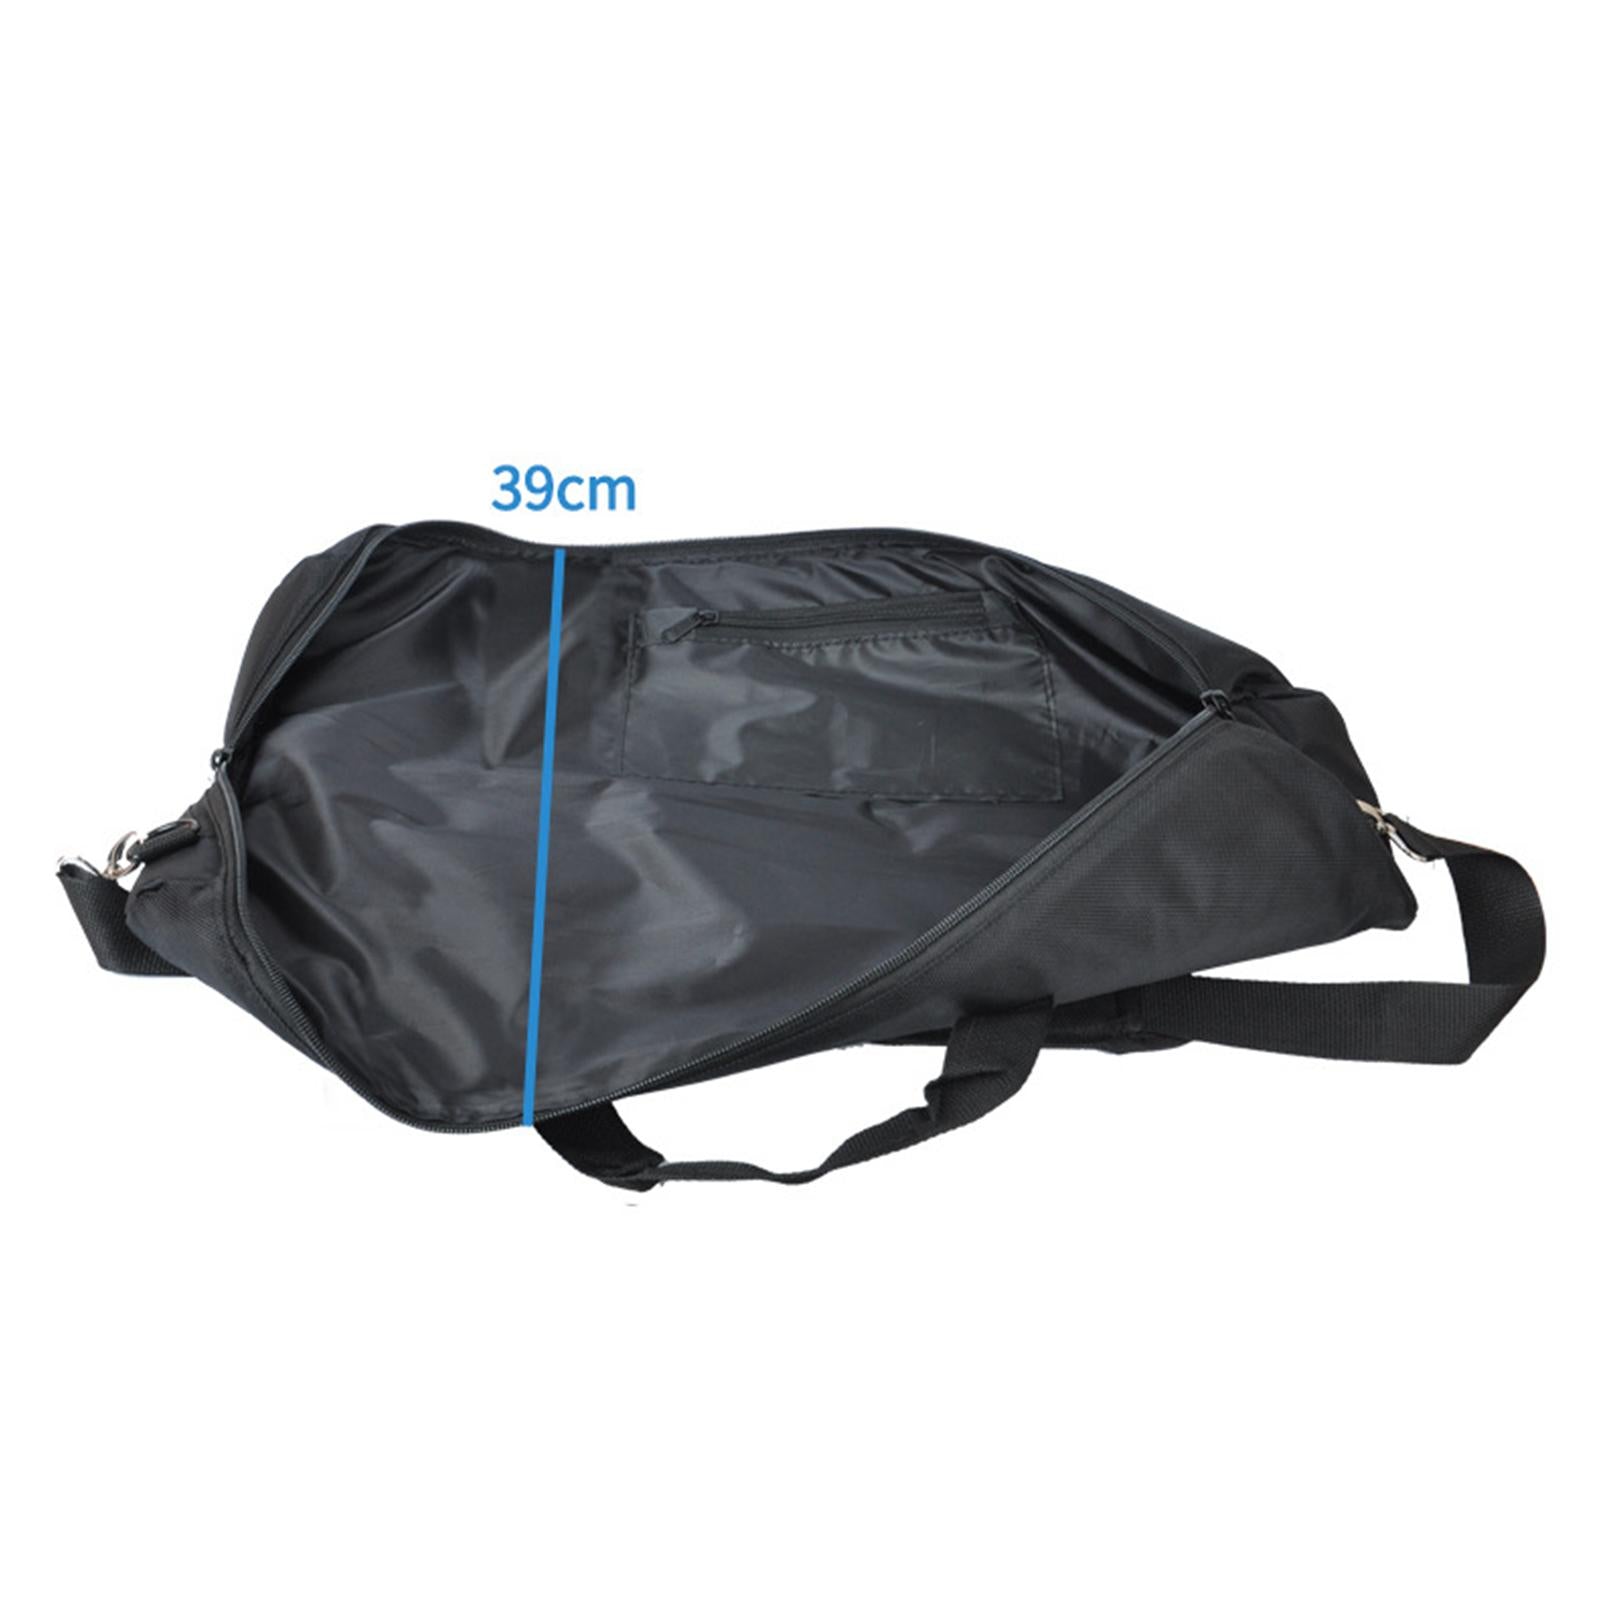 Tripod Carrying Bag Heavy Duty Multi Function Dual Use Outdoor for Umbrella 120cm